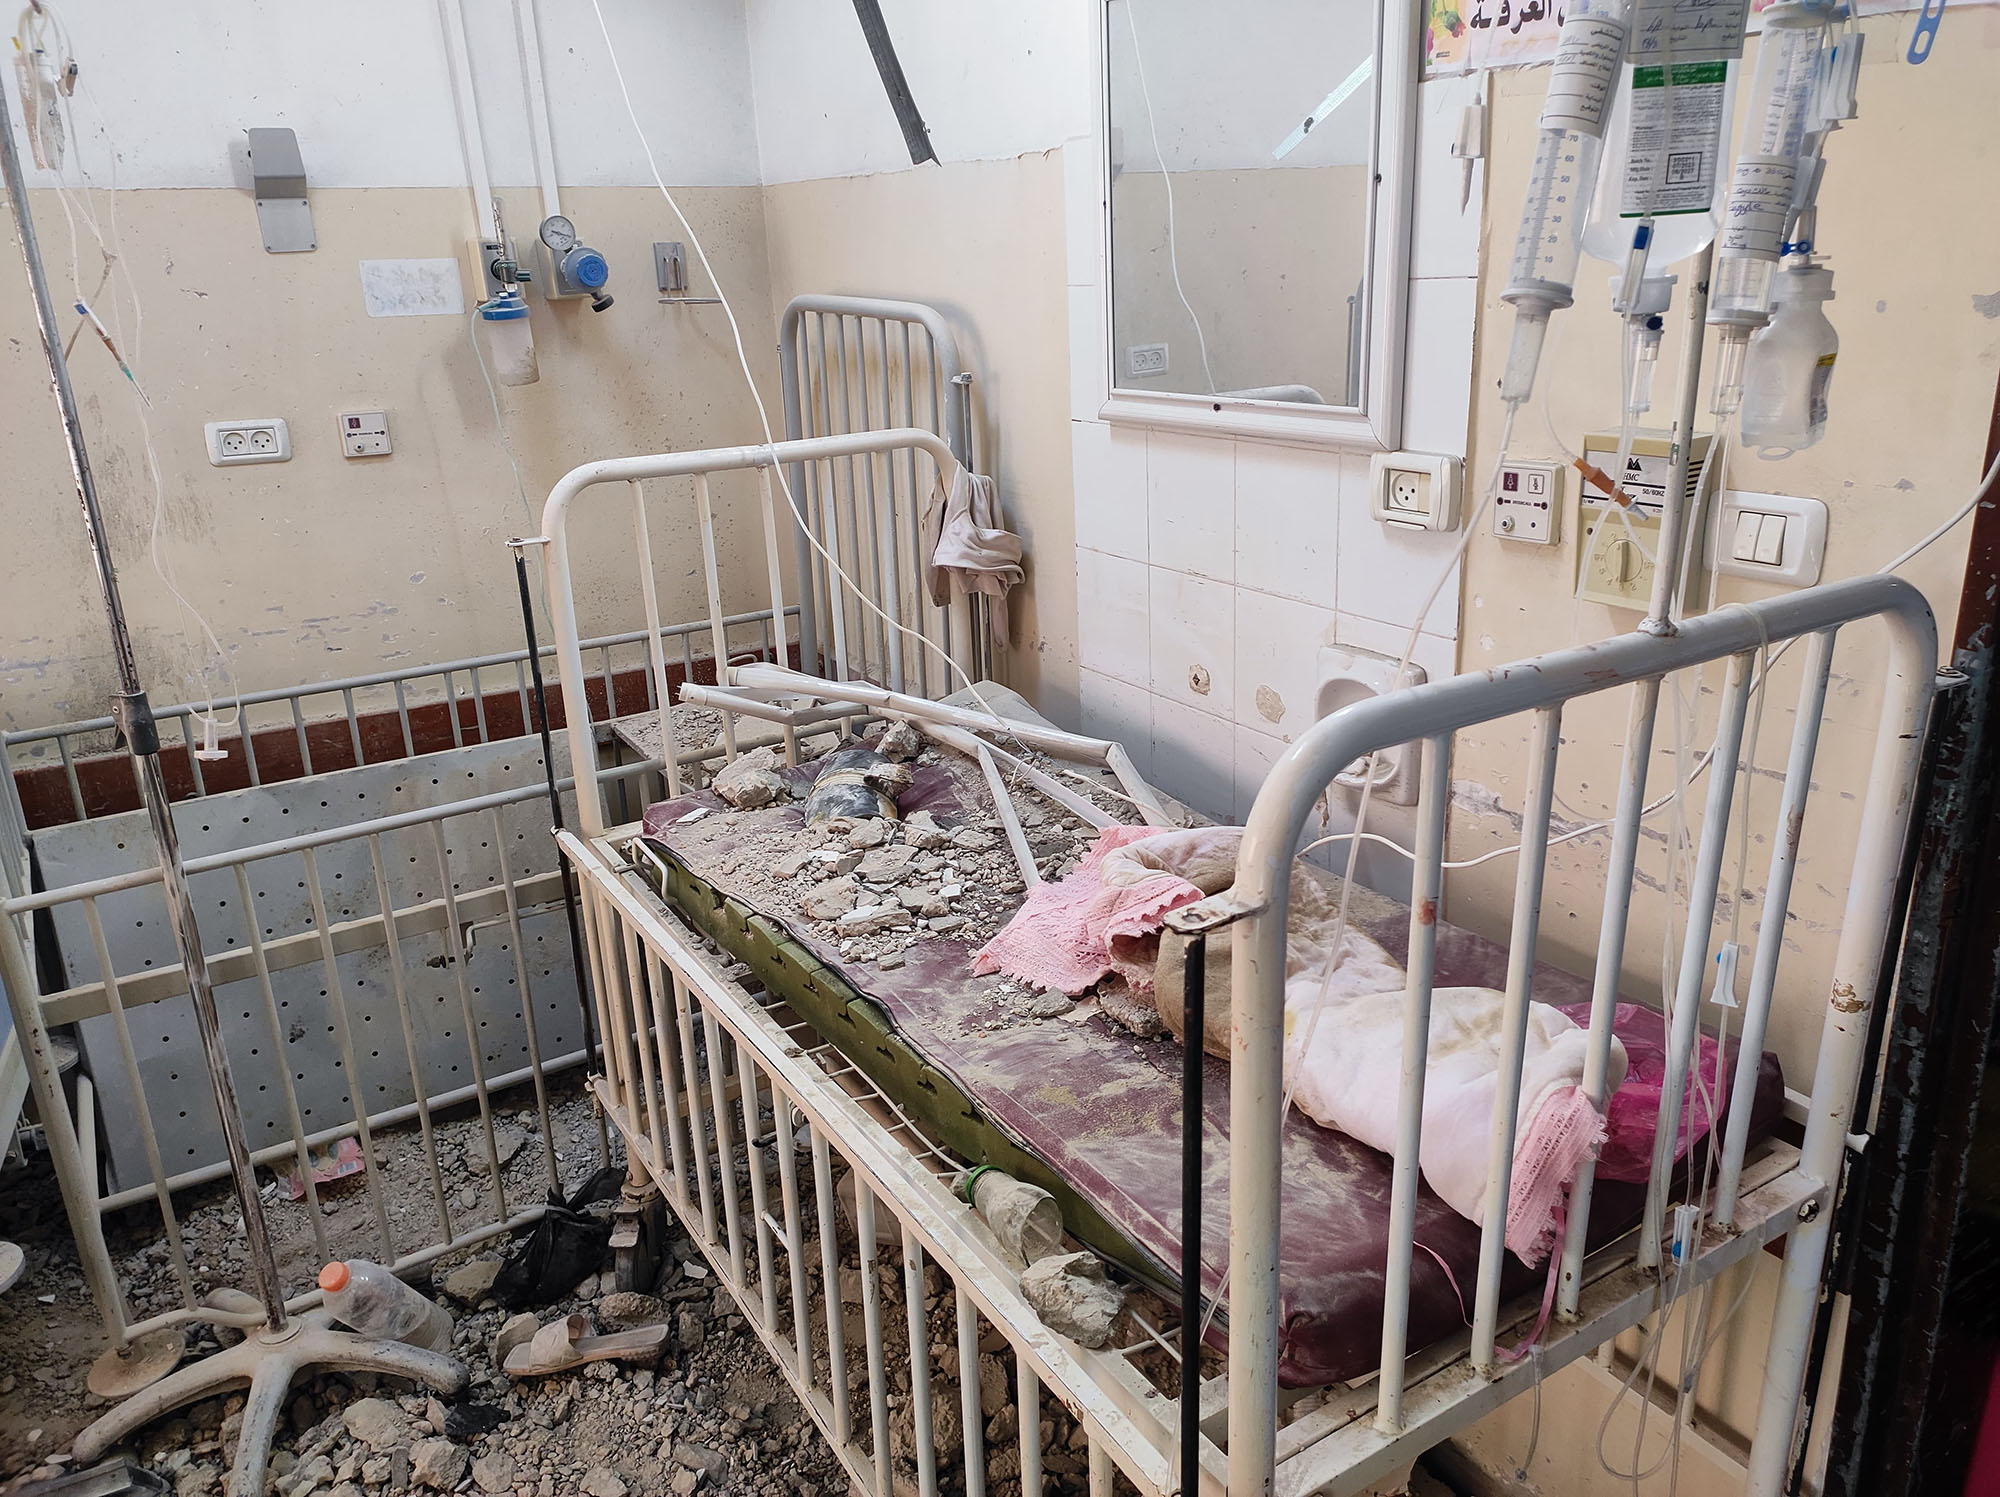 A destroyed infant intensive care unit at Kamal Adwan Hospital after targeting by the Israeli army in Beit Lahia, Gaza, on November 19.